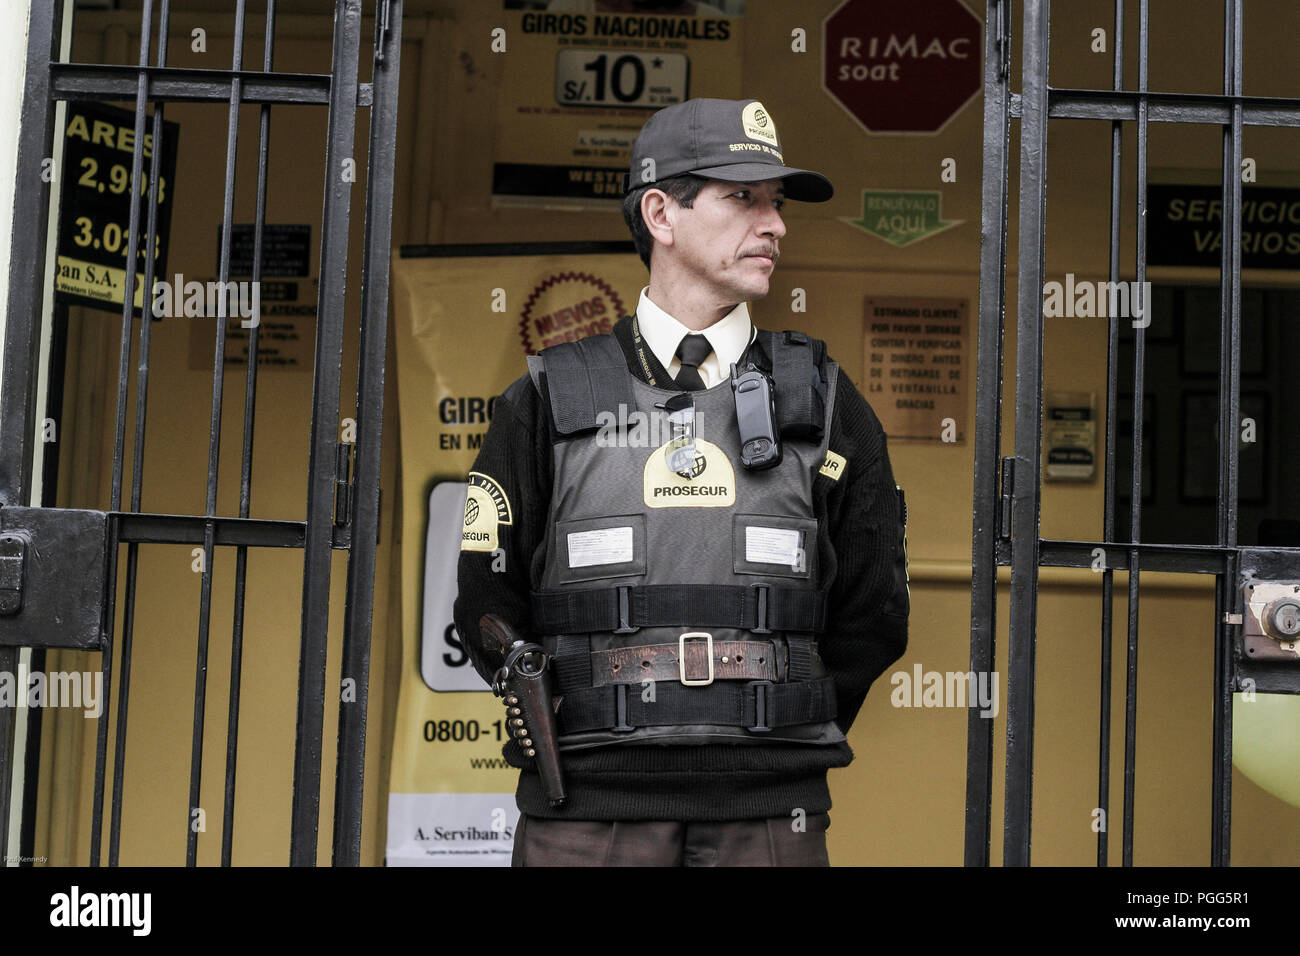 Security guard at entrance to money exchange in Miraflores, Lima, Peru Stock Photo